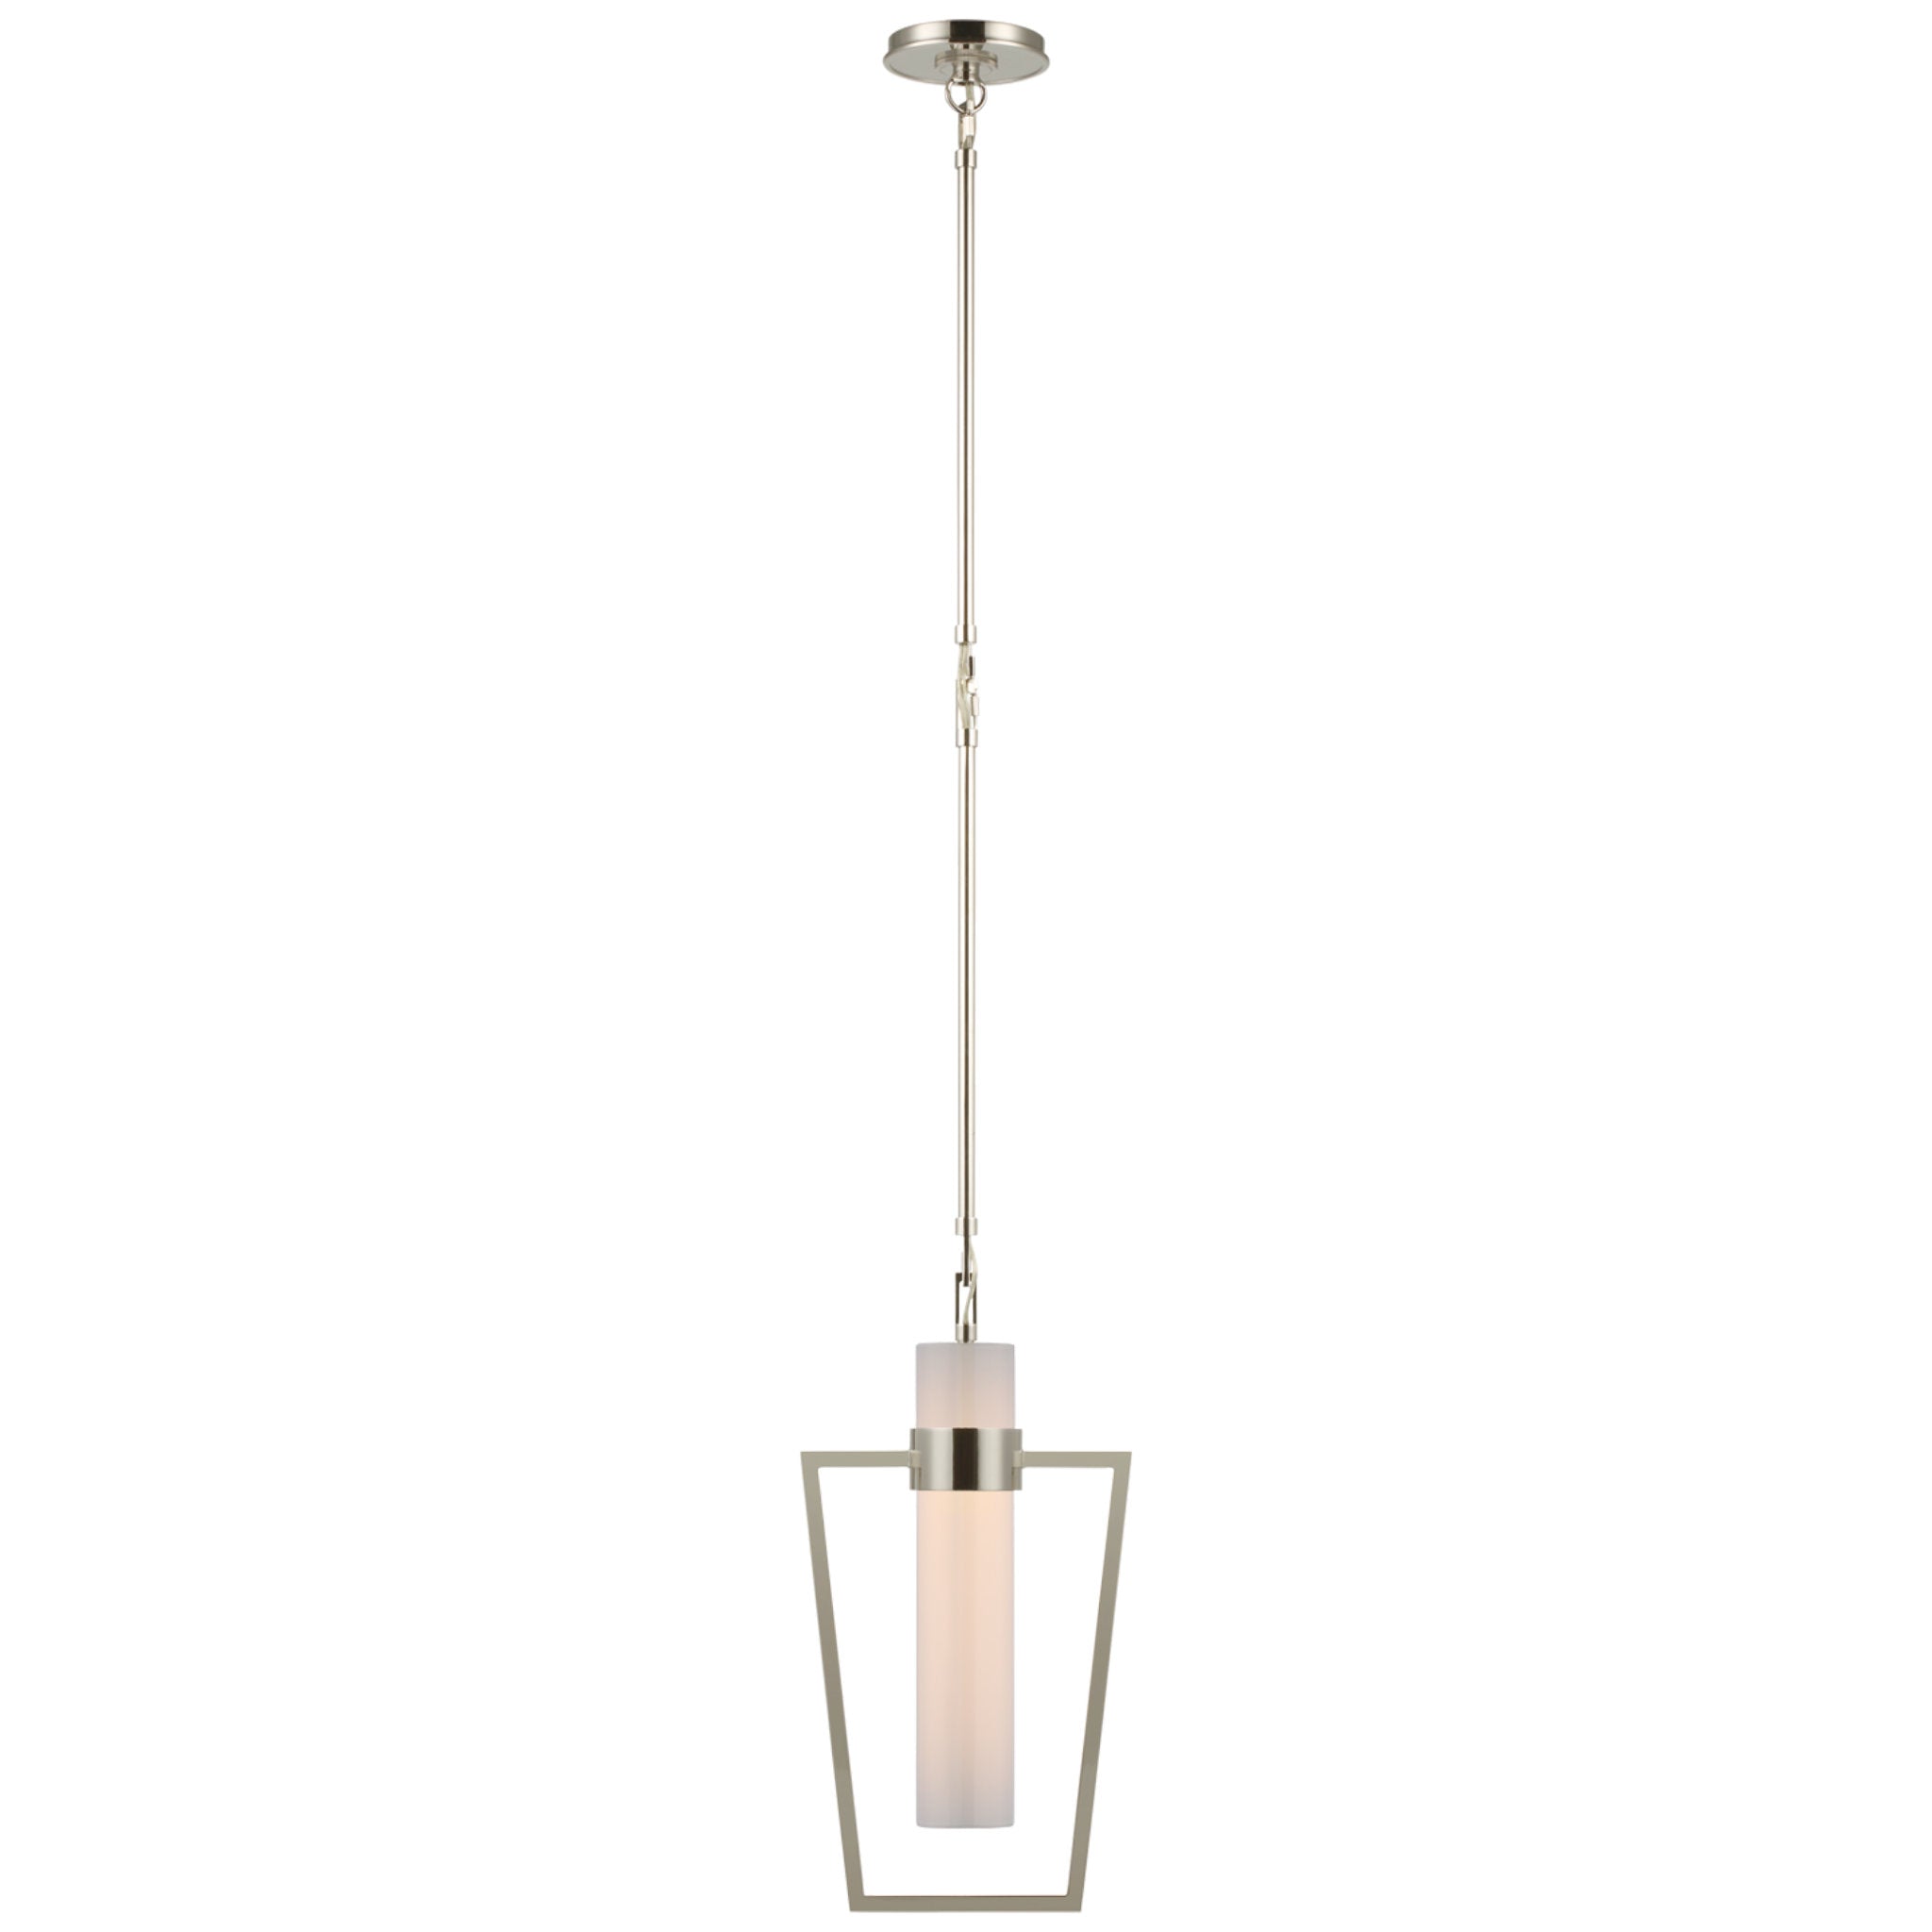 Ian K. Fowler Presidio Petite Caged Pendant in Polished Nickel with White Glass